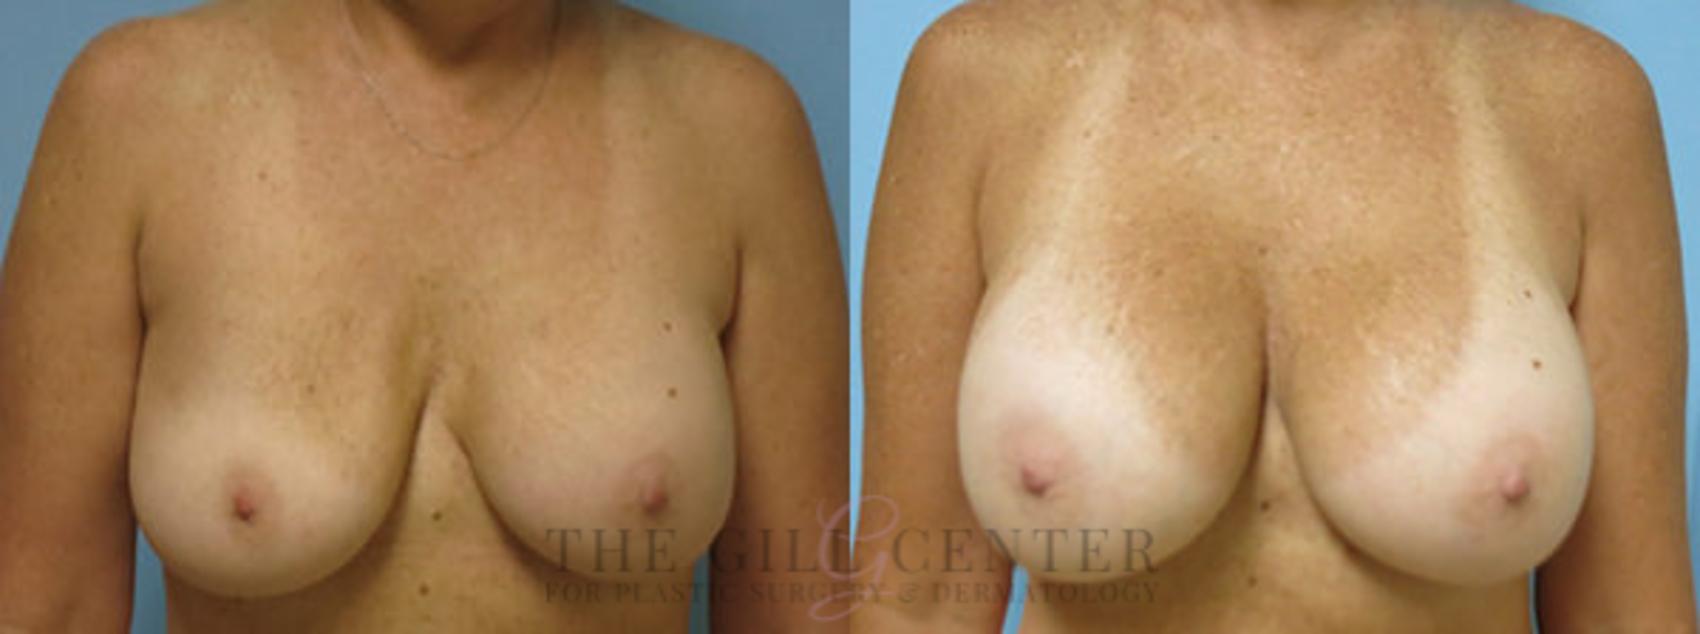 Breast Revisions Case 352 Before & After Front | The Woodlands, TX | The Gill Center for Plastic Surgery and Dermatology